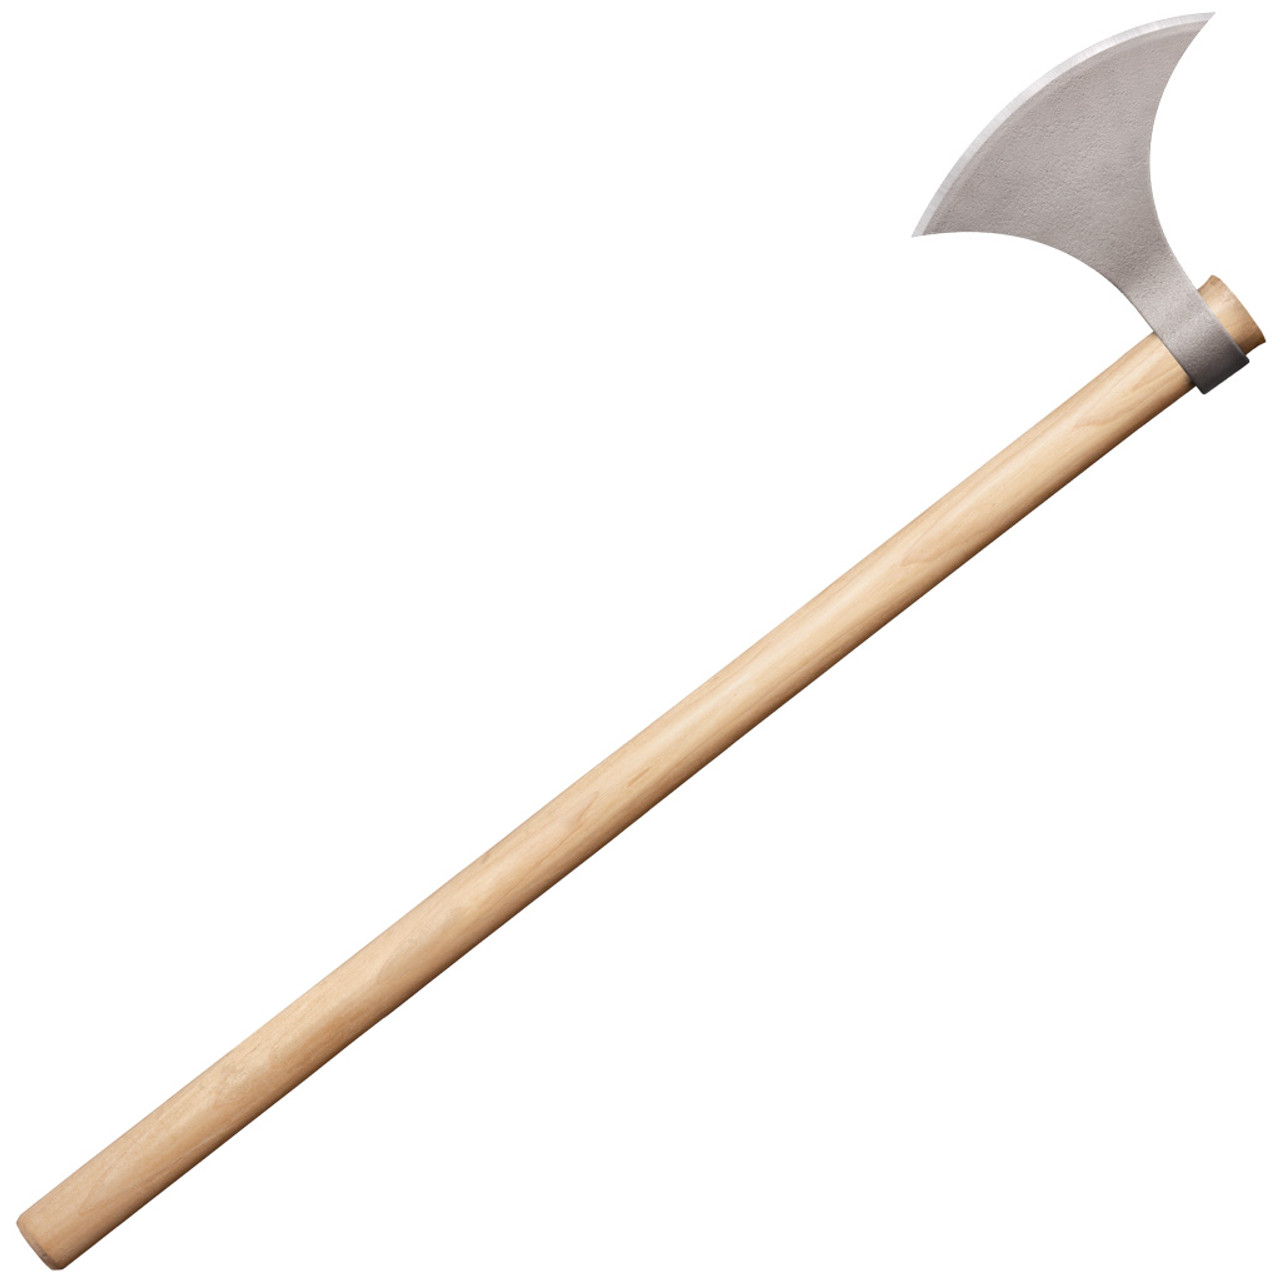 axe weapon real